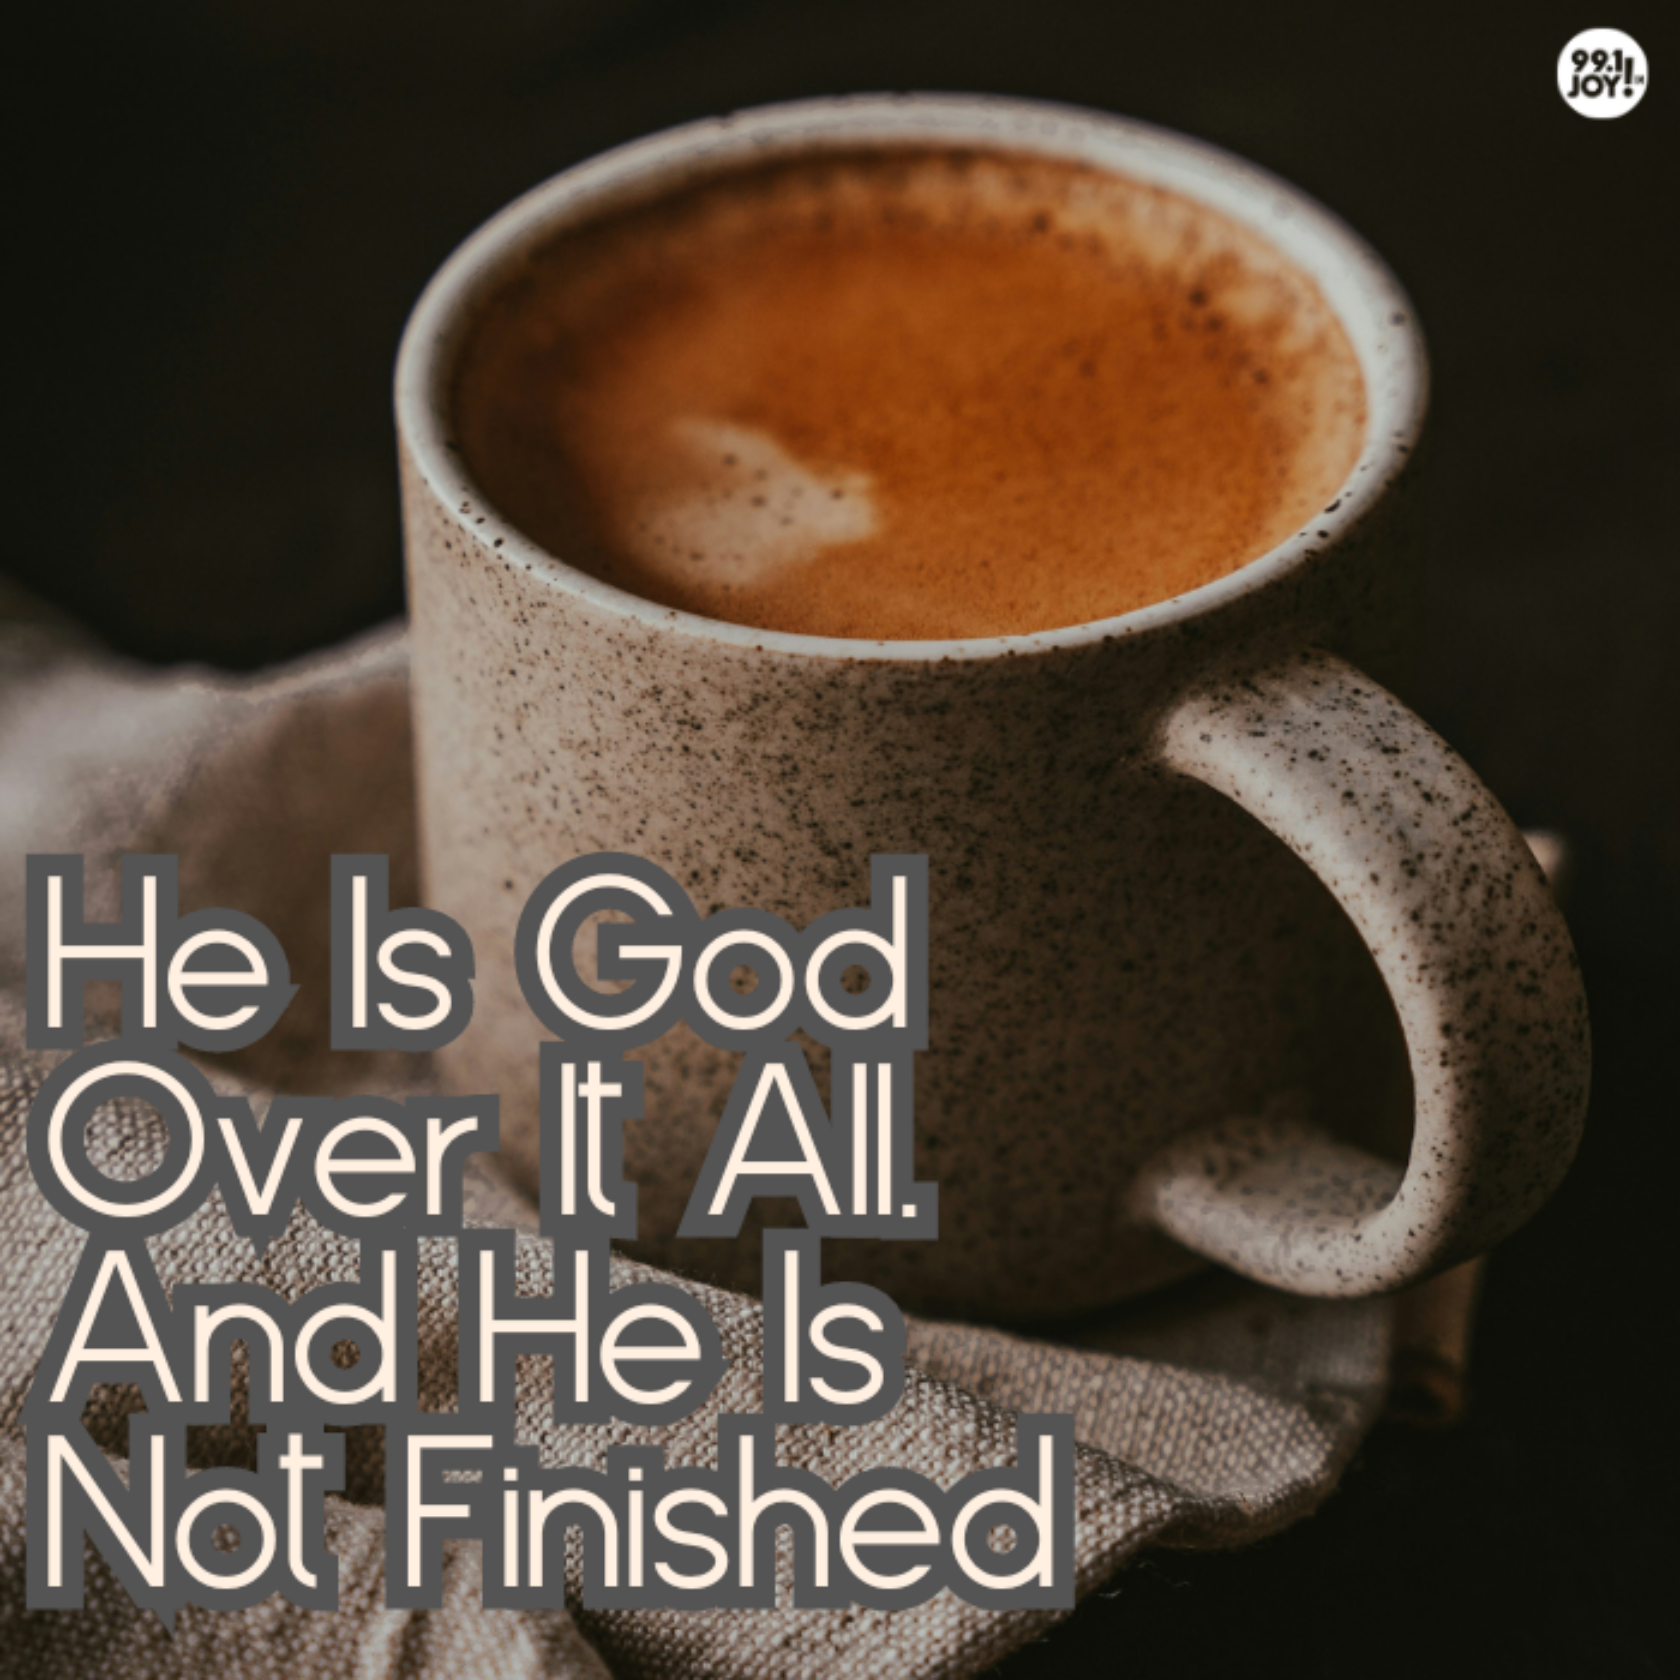 He Is God Over It All.  And He Is Not Finished